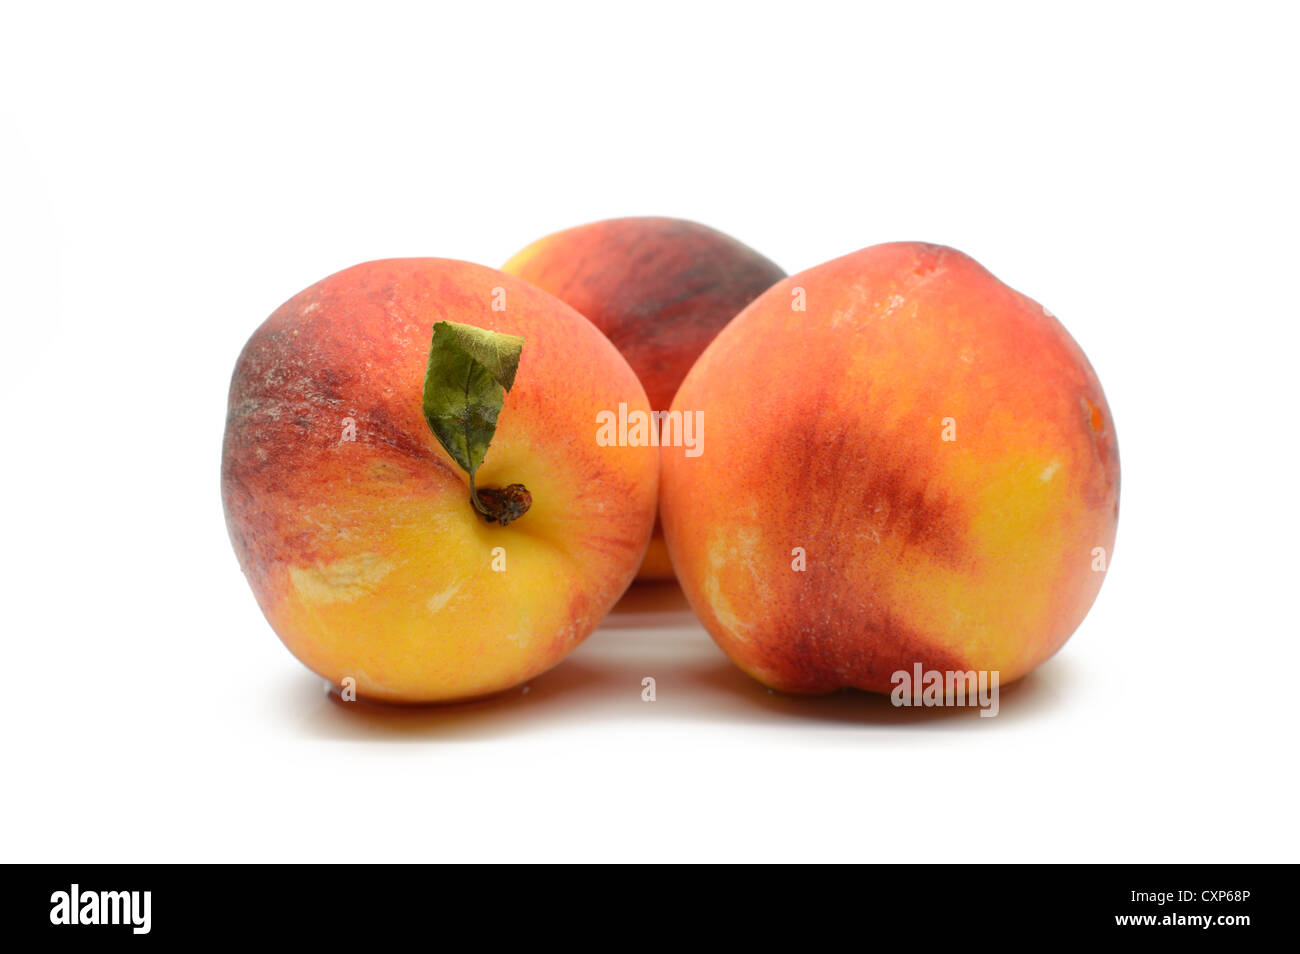 Juicy peaches on a white background, close-up Stock Photo